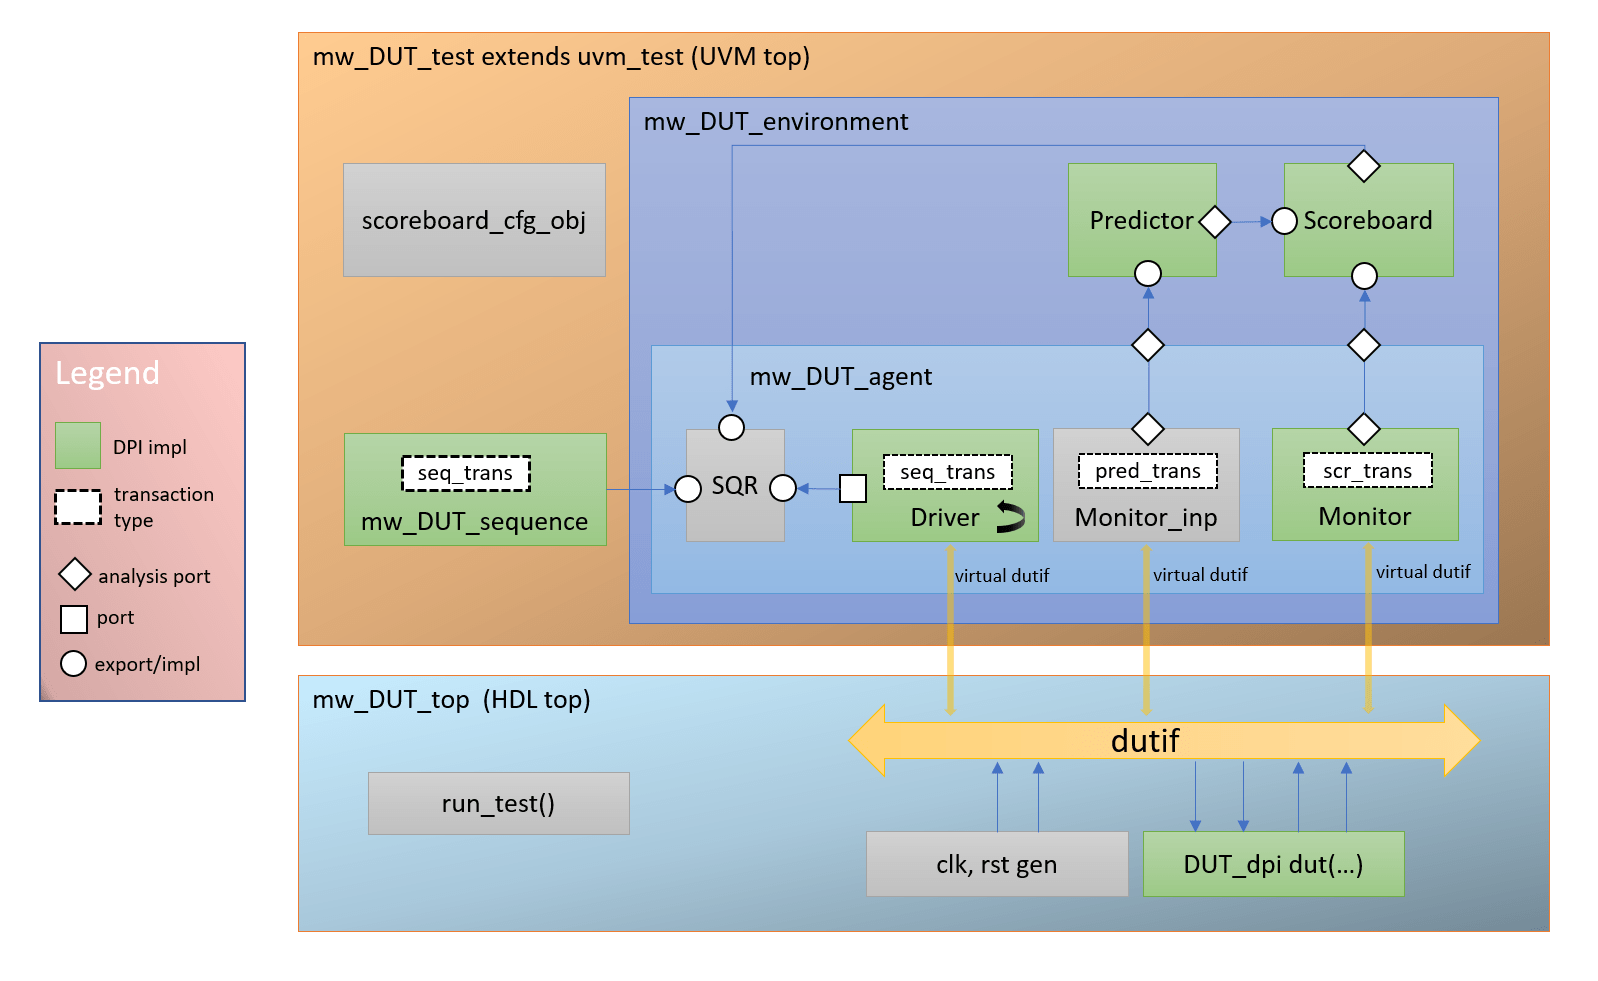 Image shows a UVM block diagram with a DUT and a Test module in the Top module. The Test includes an Environment module and a sequence. The Environment includes a module for the scoreboard, the predictor, and an Agent module. The Agent Includes a sequencer that communicates with the Sequence in the Test module, get an input from the Scoreboard, and communicates with a driver module. The driver drives a monitor and a Monitor-Input block. The monitor connects to the Scoreboard, and the Monitor input connects to the Scoreboard directly, or via the Predictor module in the Environment.